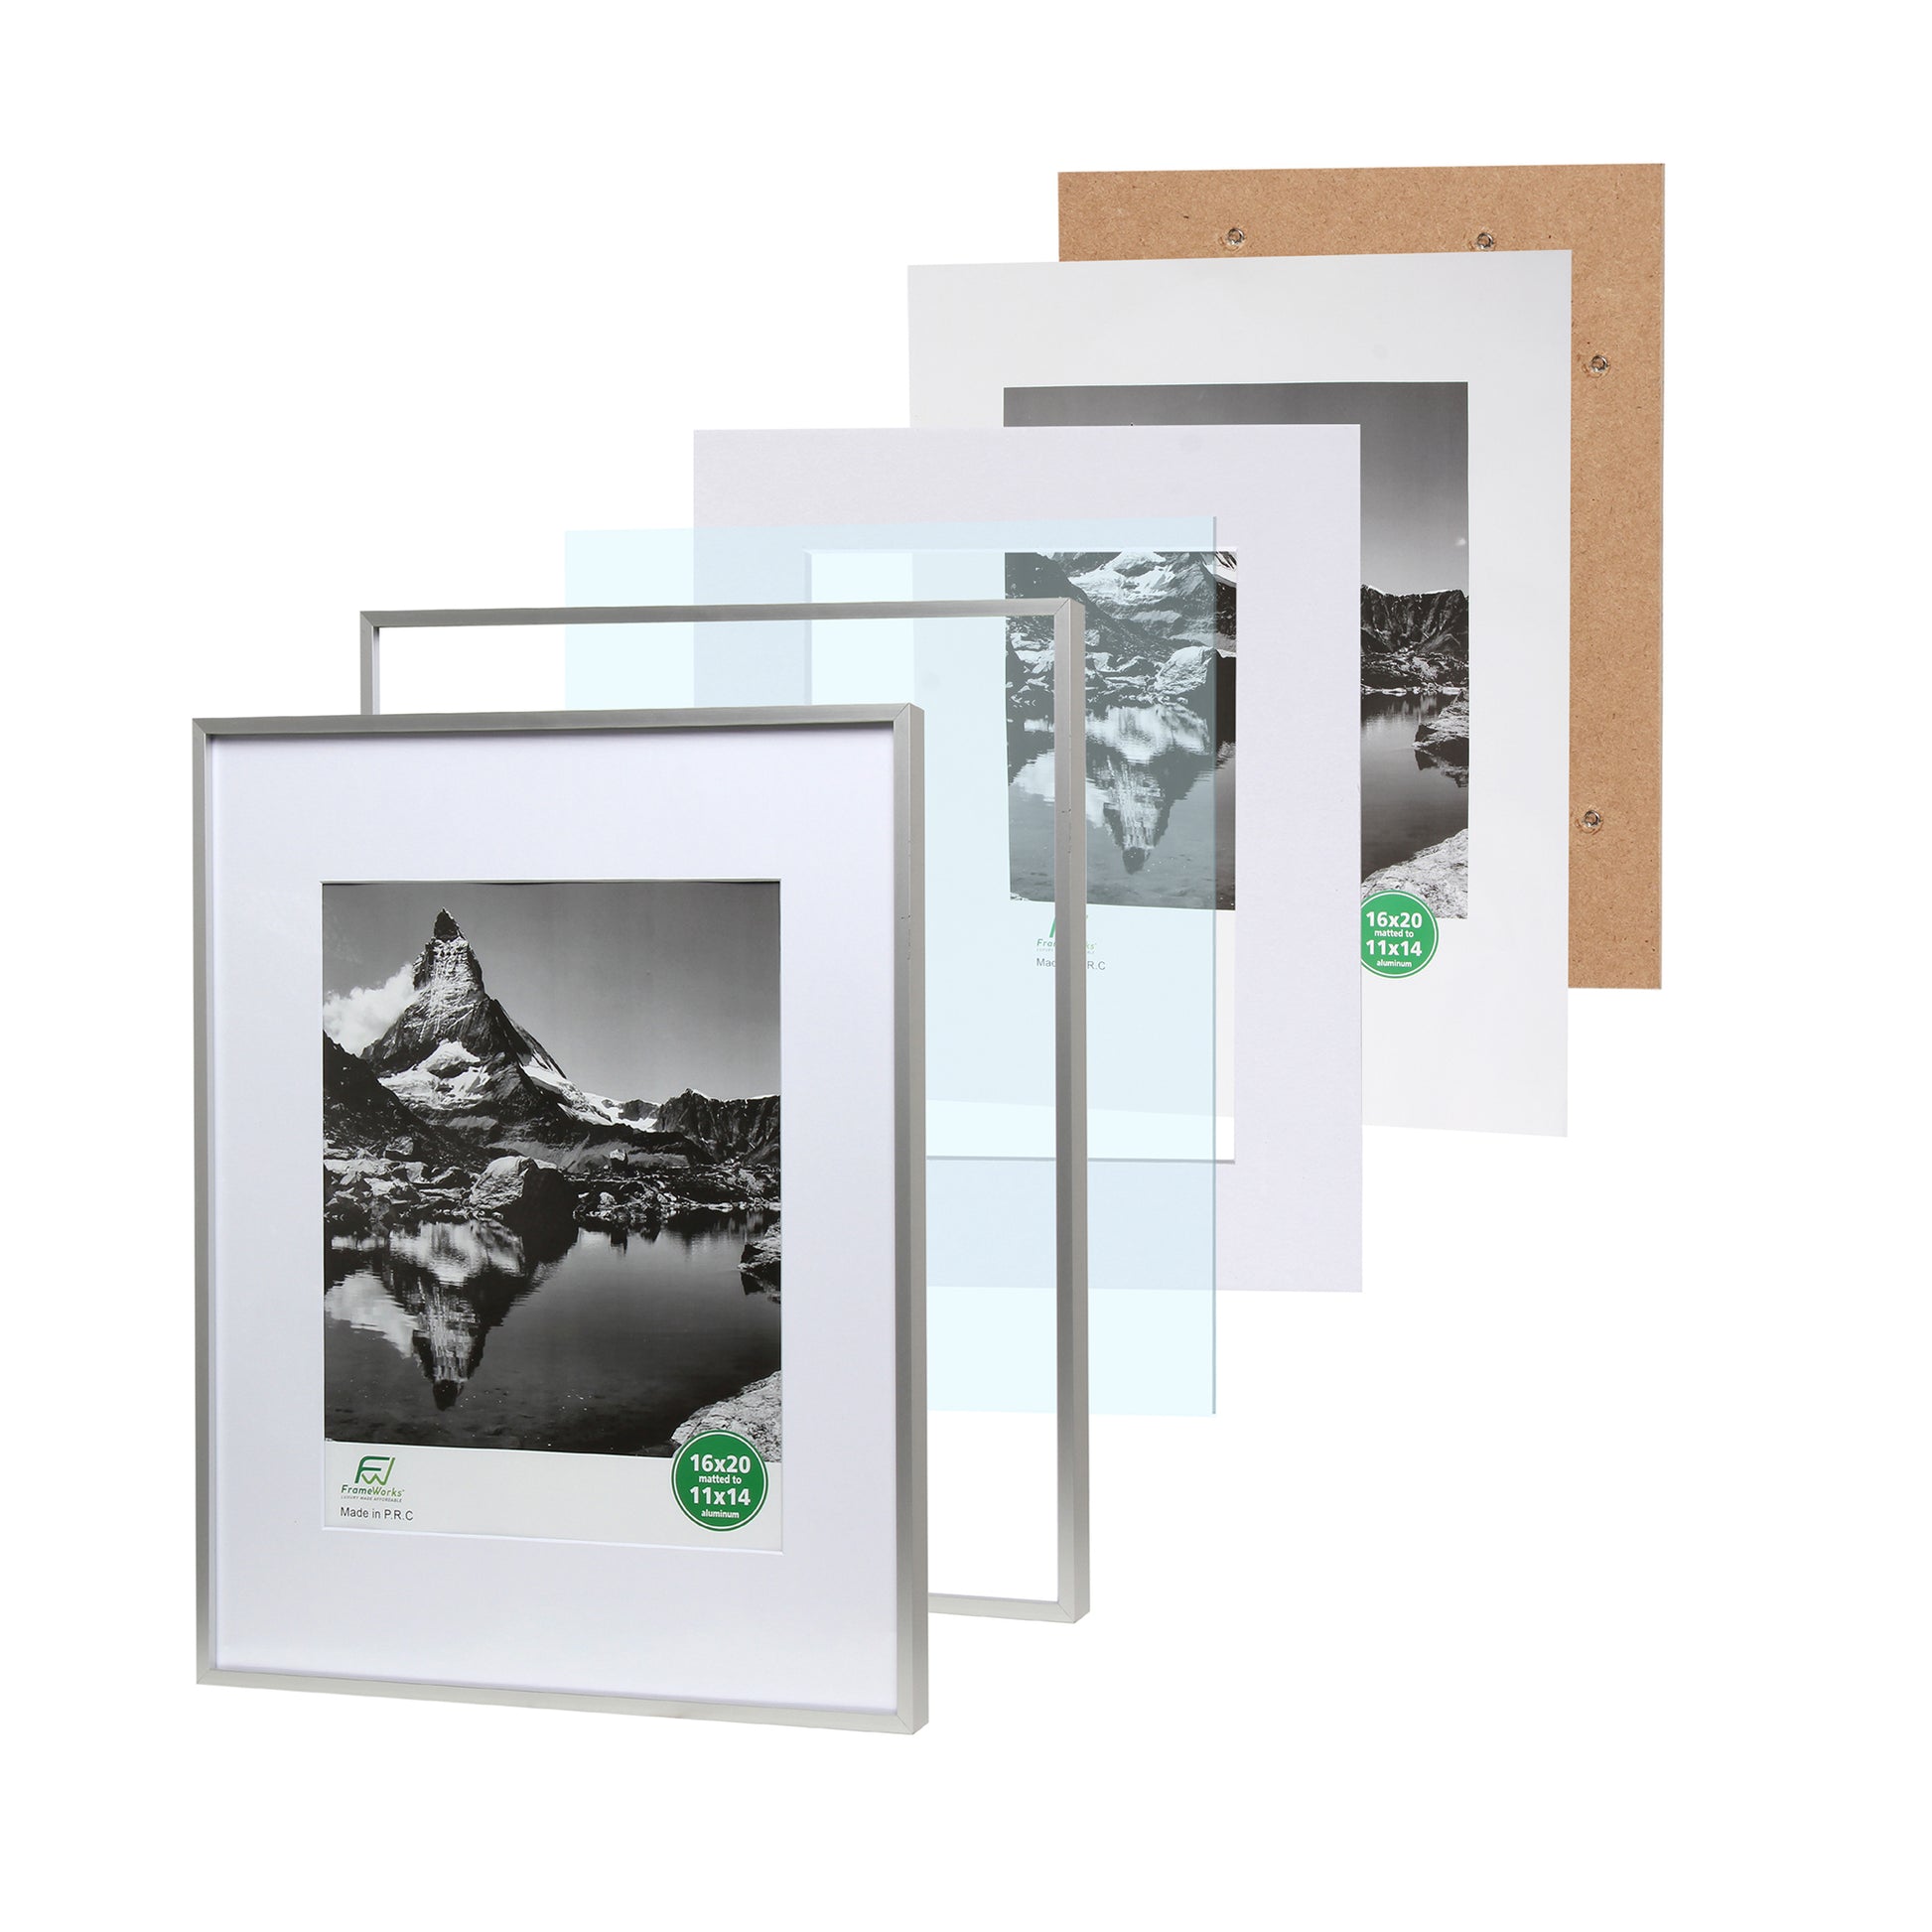 16 x 20 Deluxe Silver Aluminum Contemporary Picture Frame, 11 x